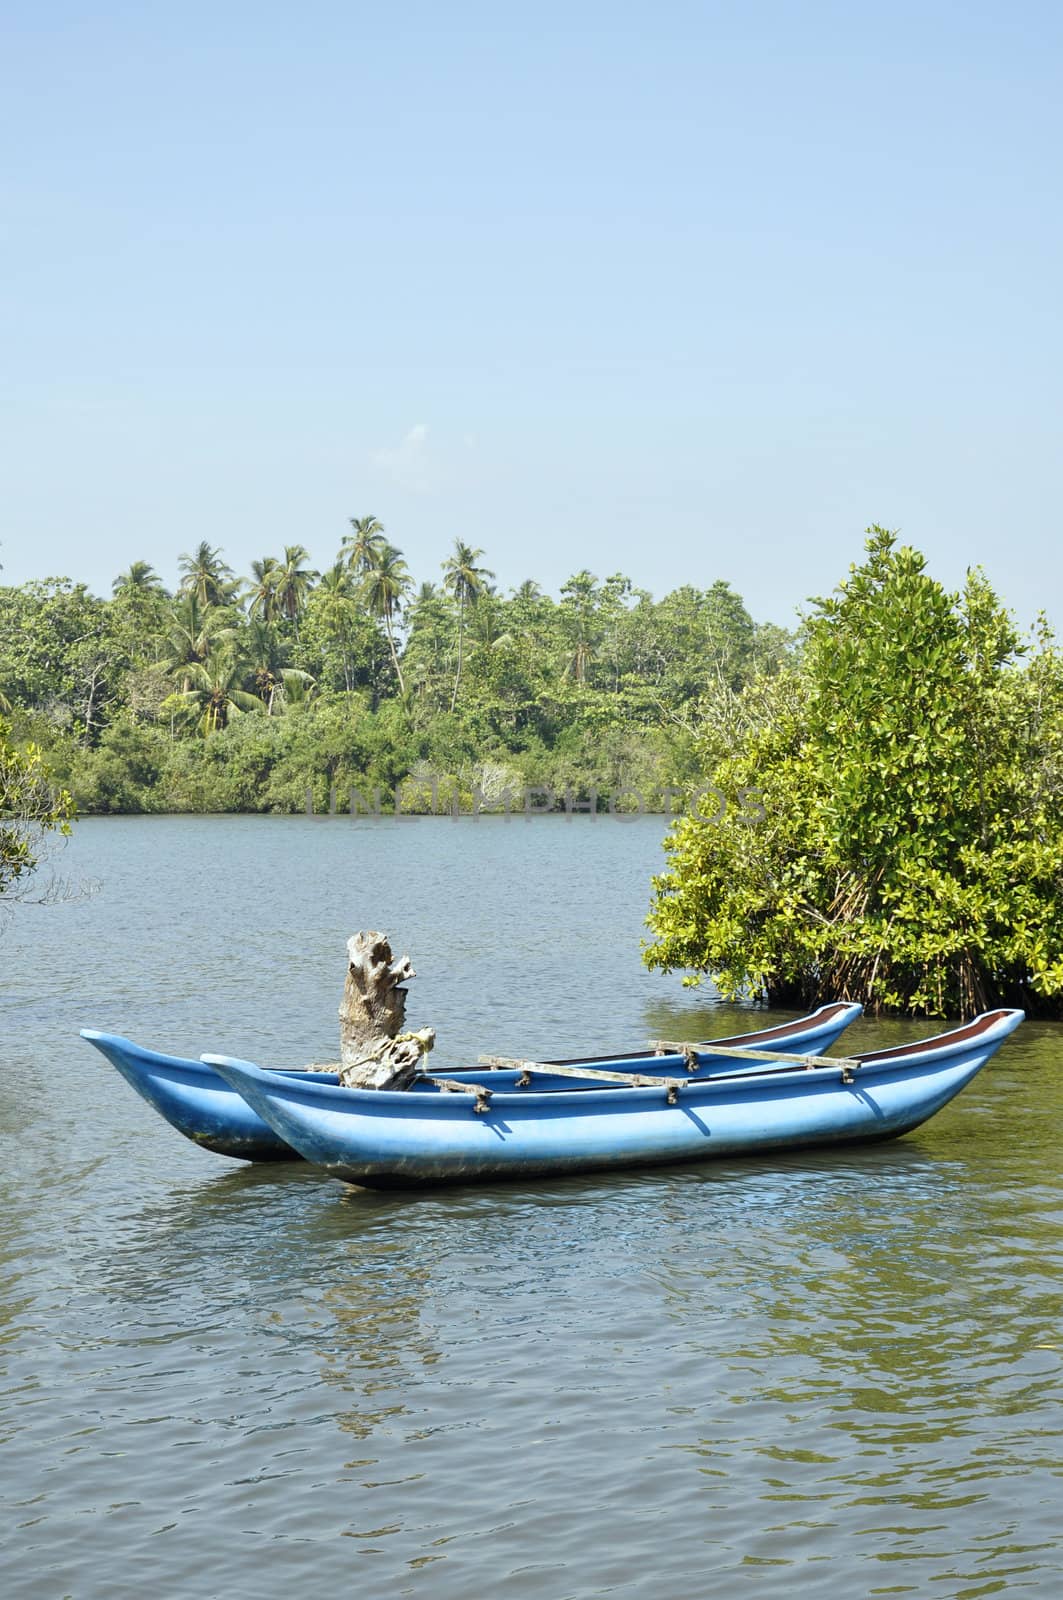 A bright blue boat beautifully stranded on a lake surrounded by palm trees in Sri Lanka